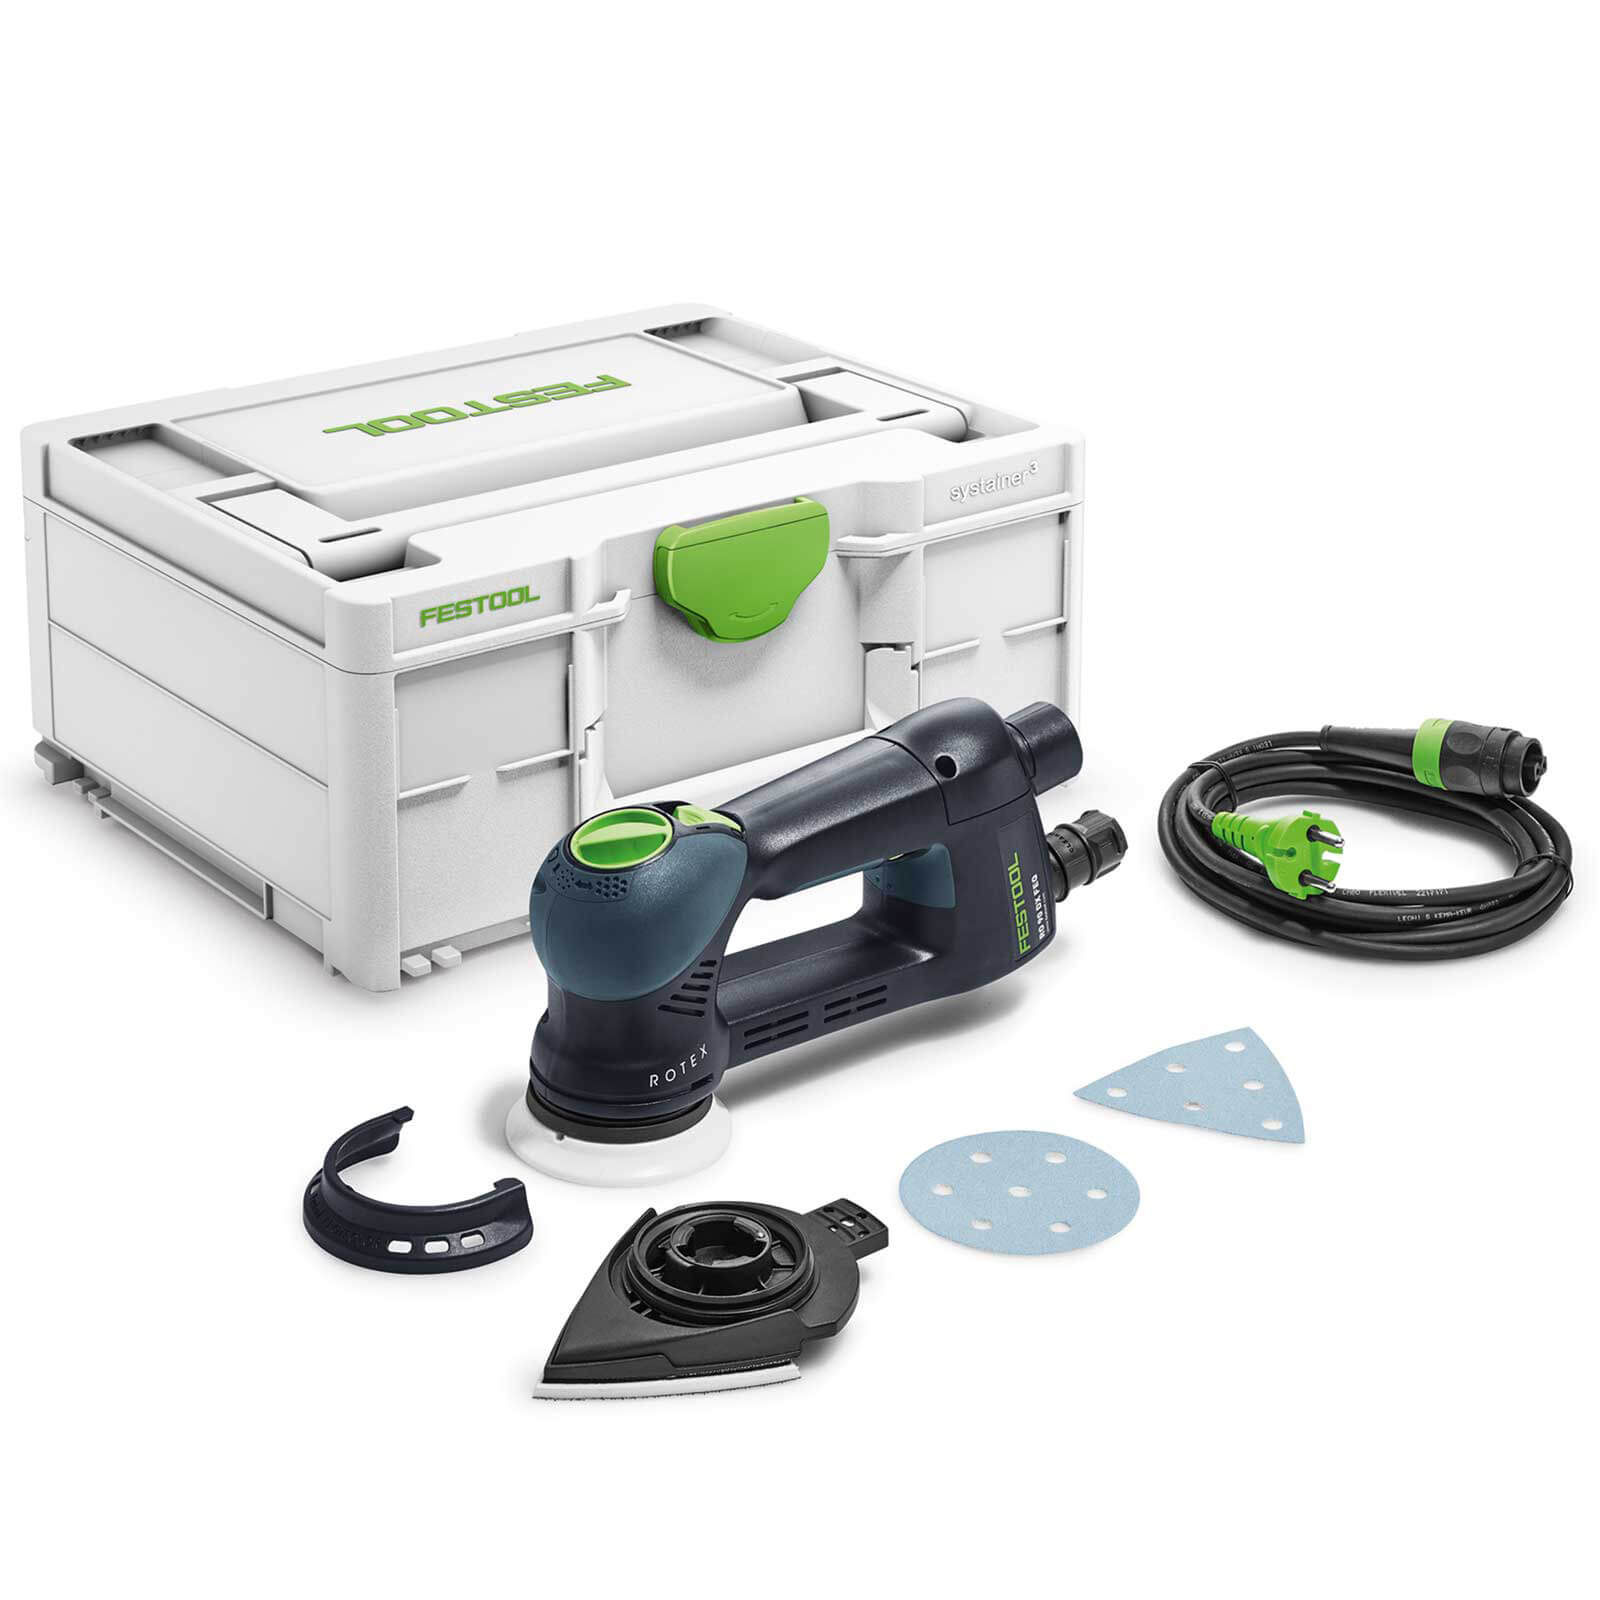 Image of Festool Rotex RO 90 DX FEQ Plus Disc and Delta Sander 90mm 240v